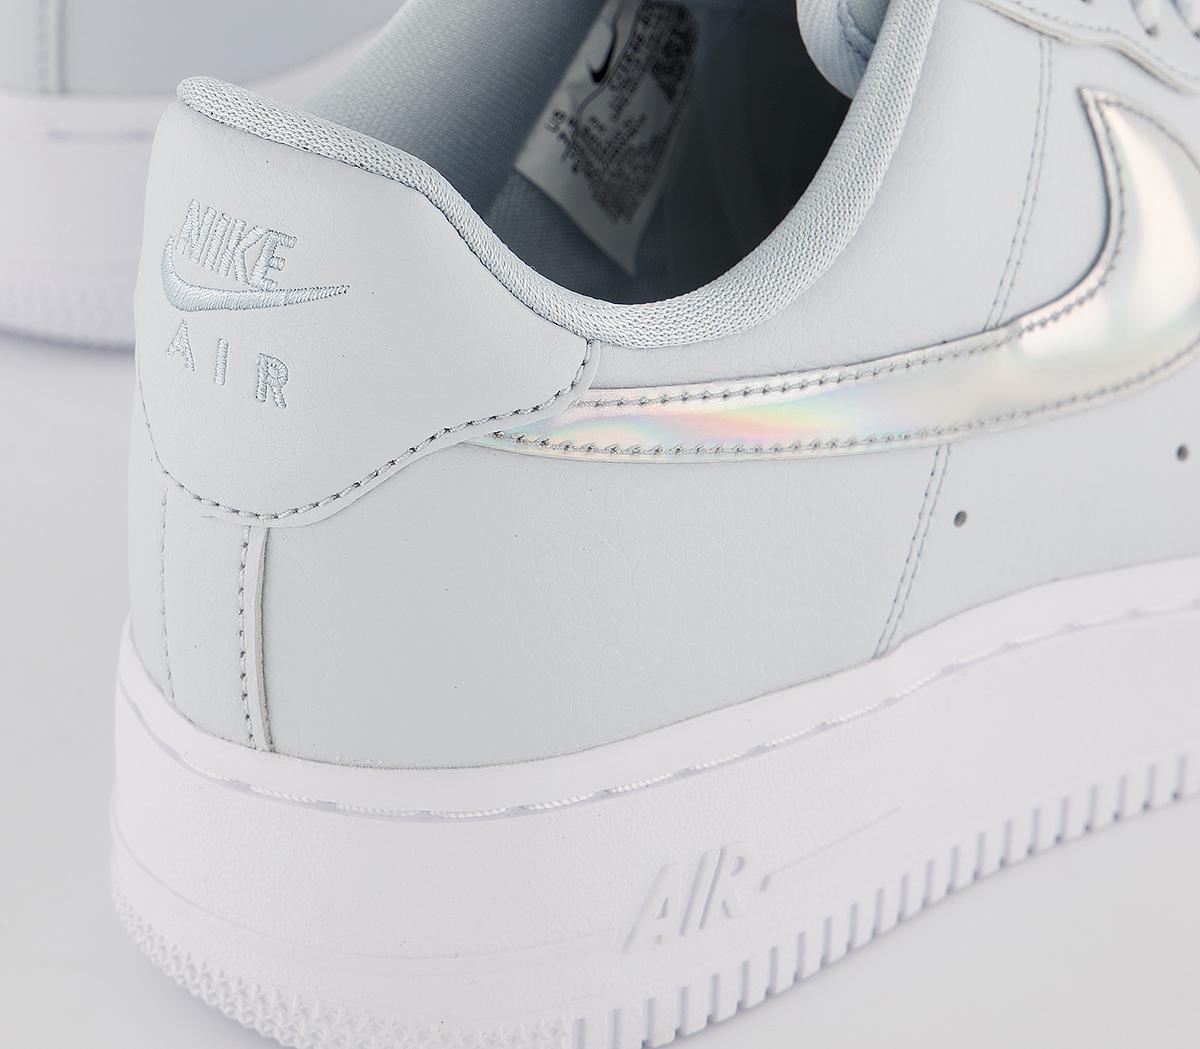 nike air force 1 07 white iridescent f